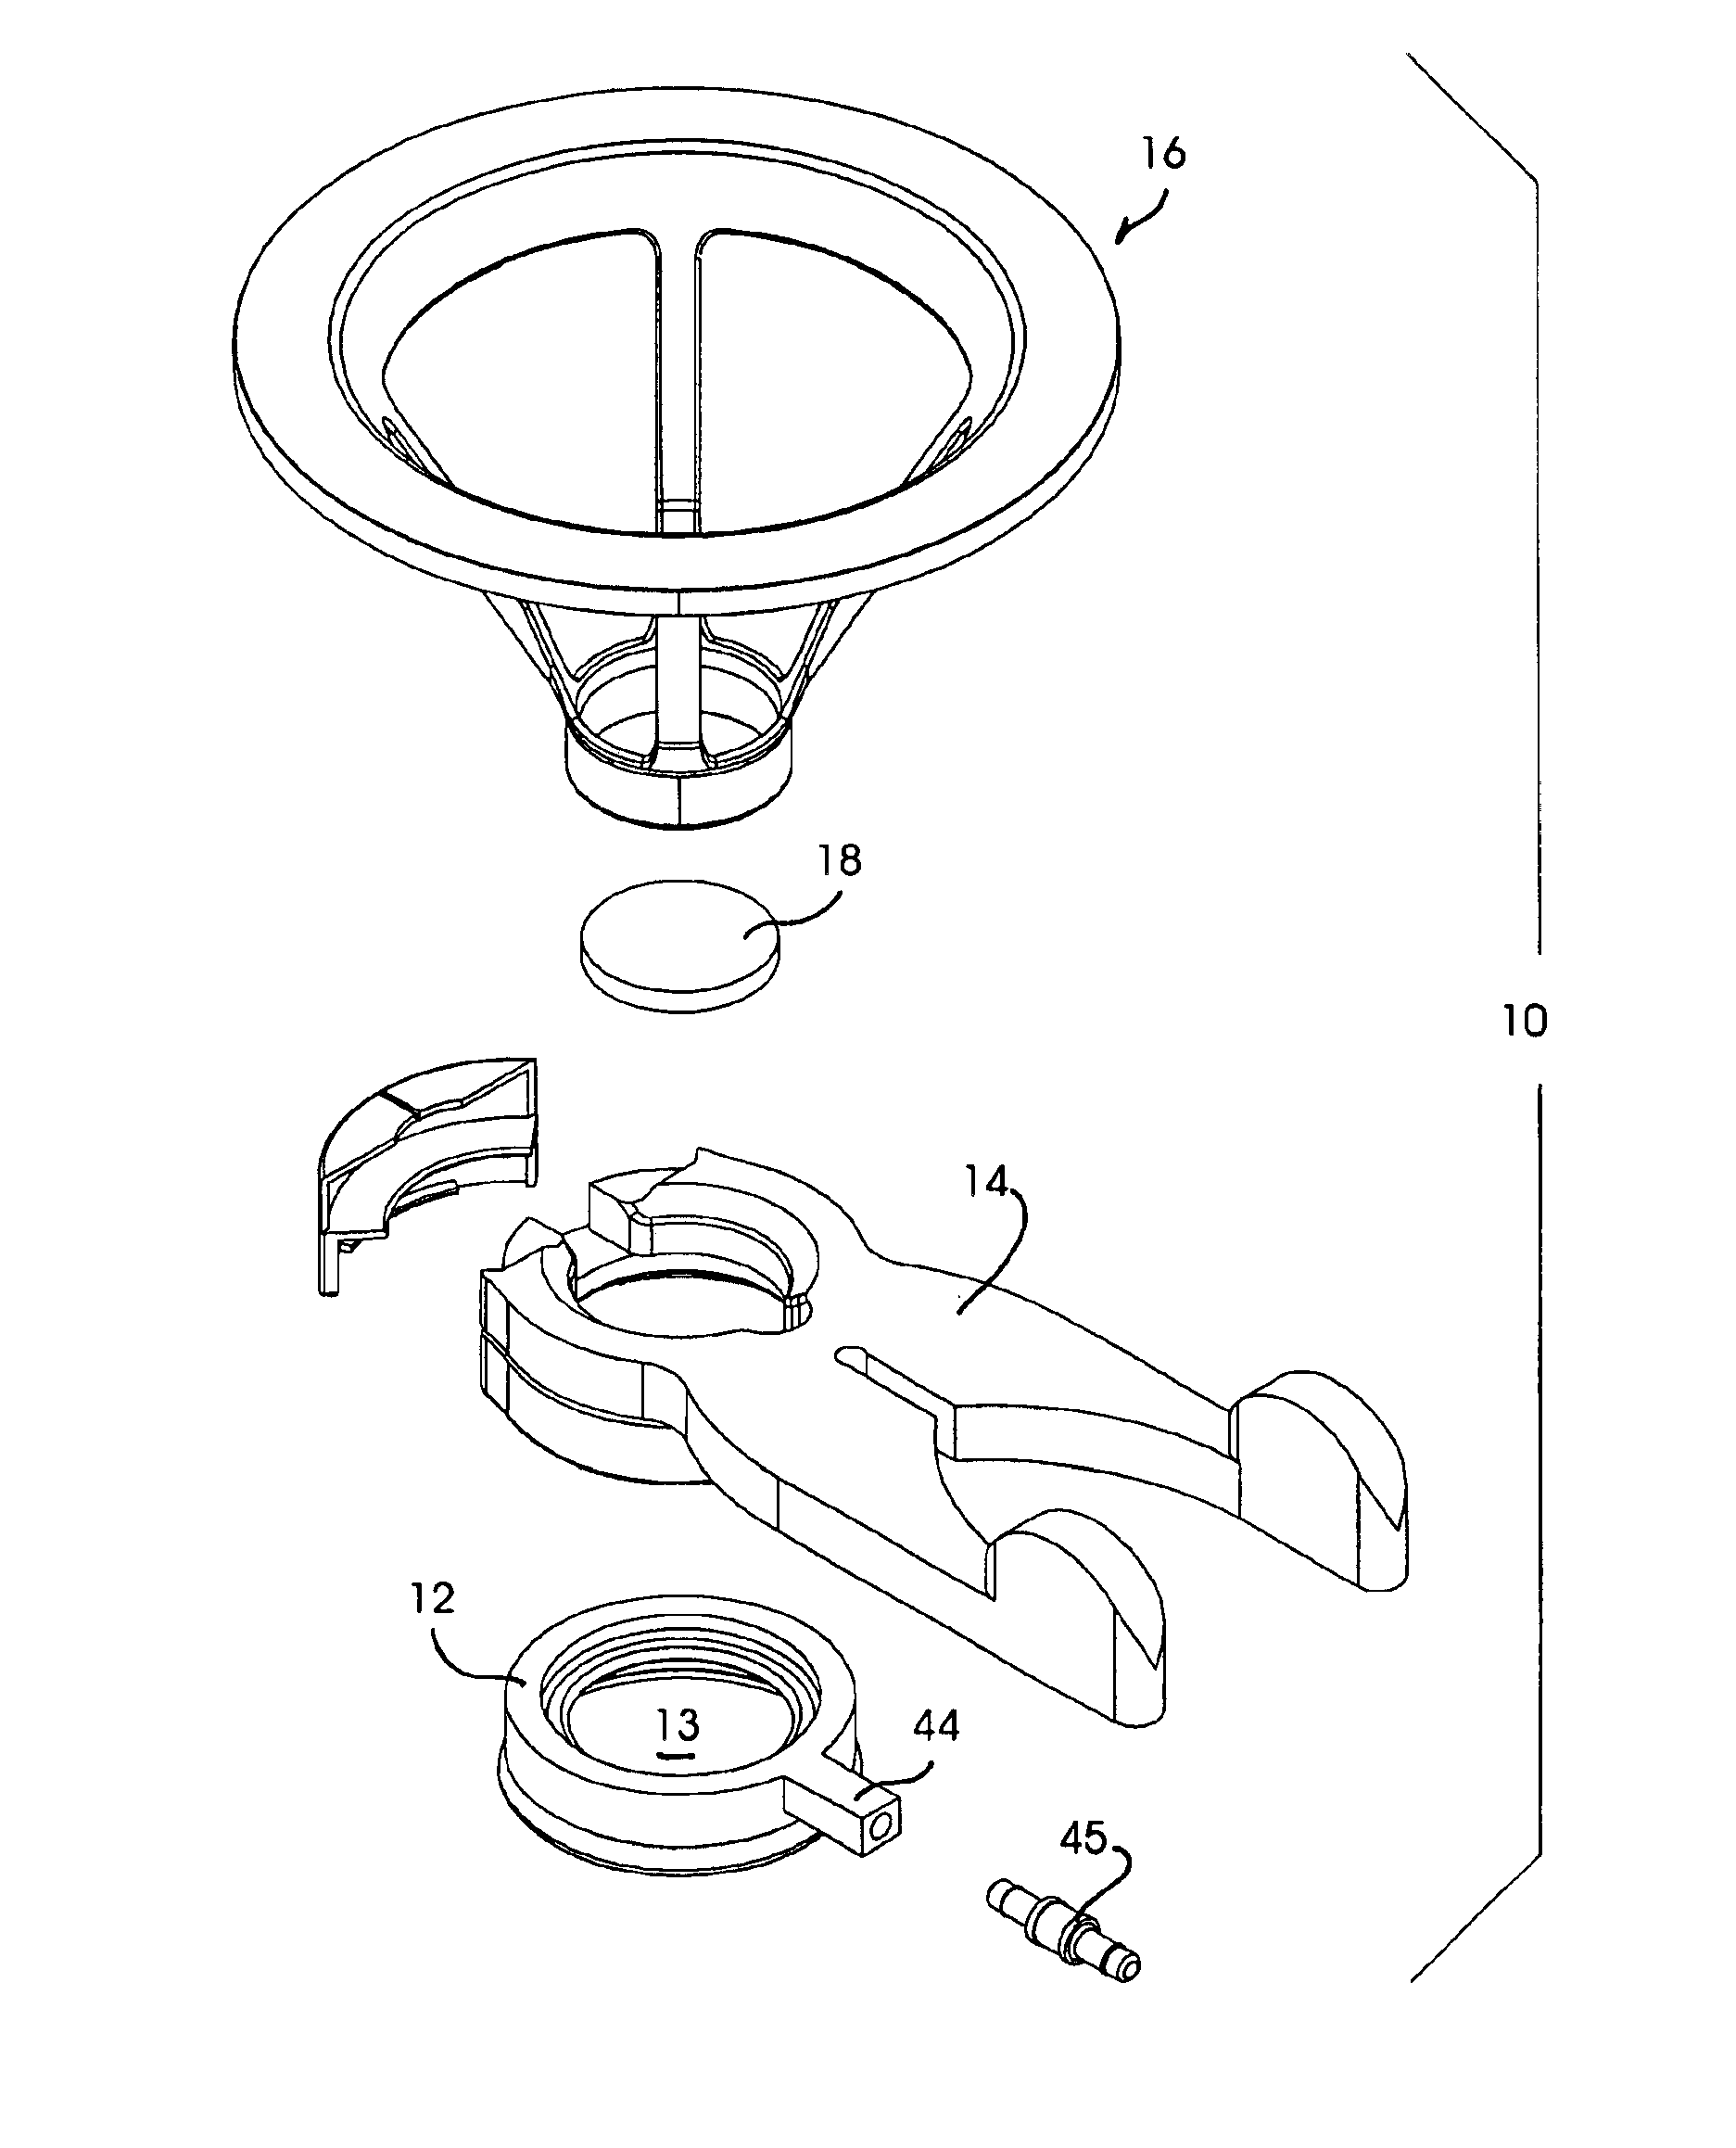 Ocular fixation and stabilization device for ophthalmic surgical applications